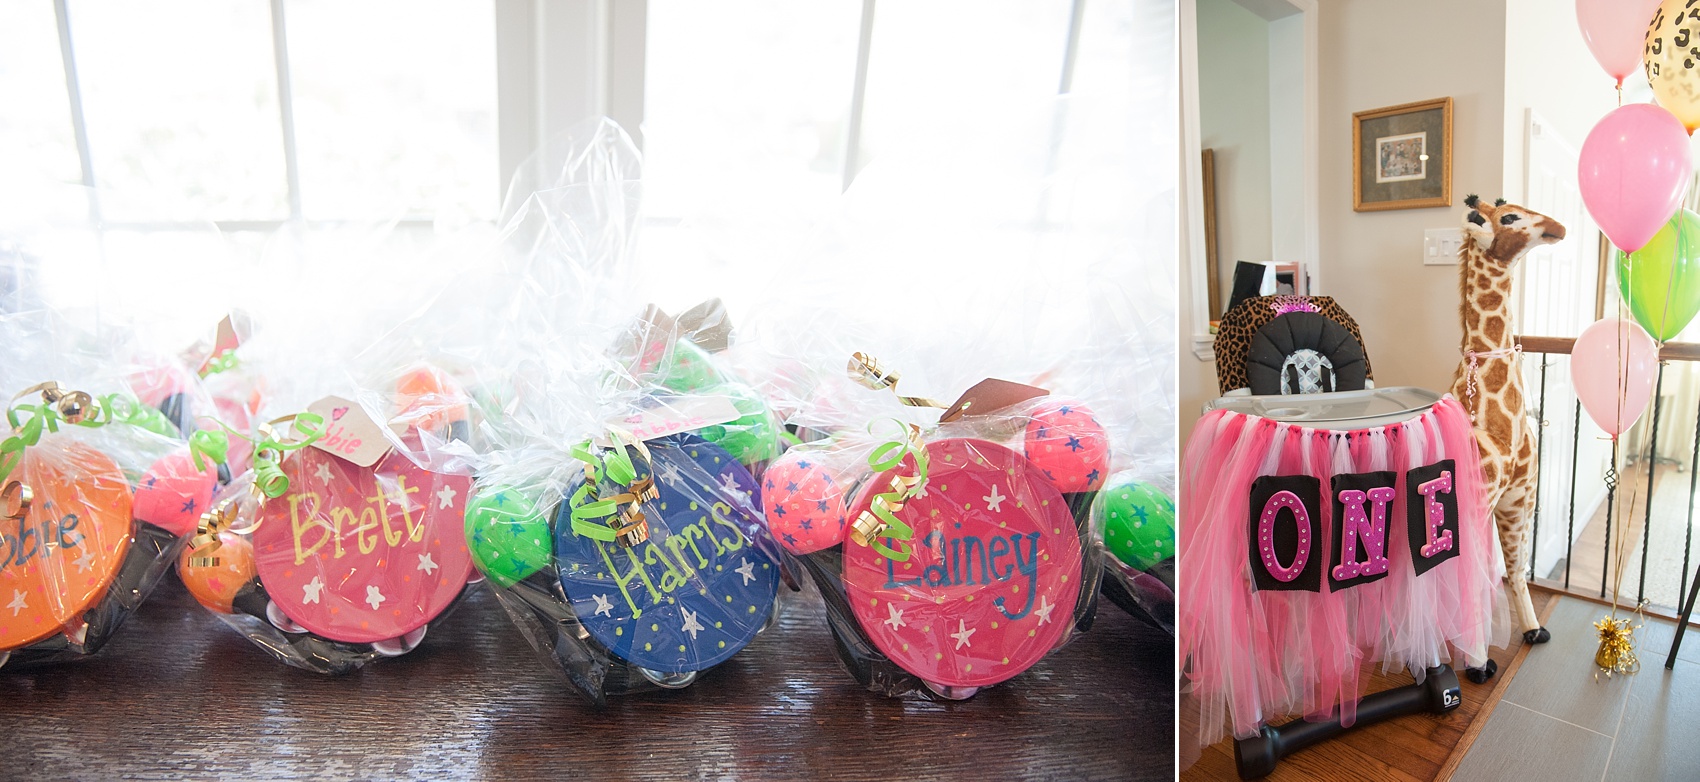 First birthday party favors and high chair decorations. Photos by Mikkel Paige Photography.